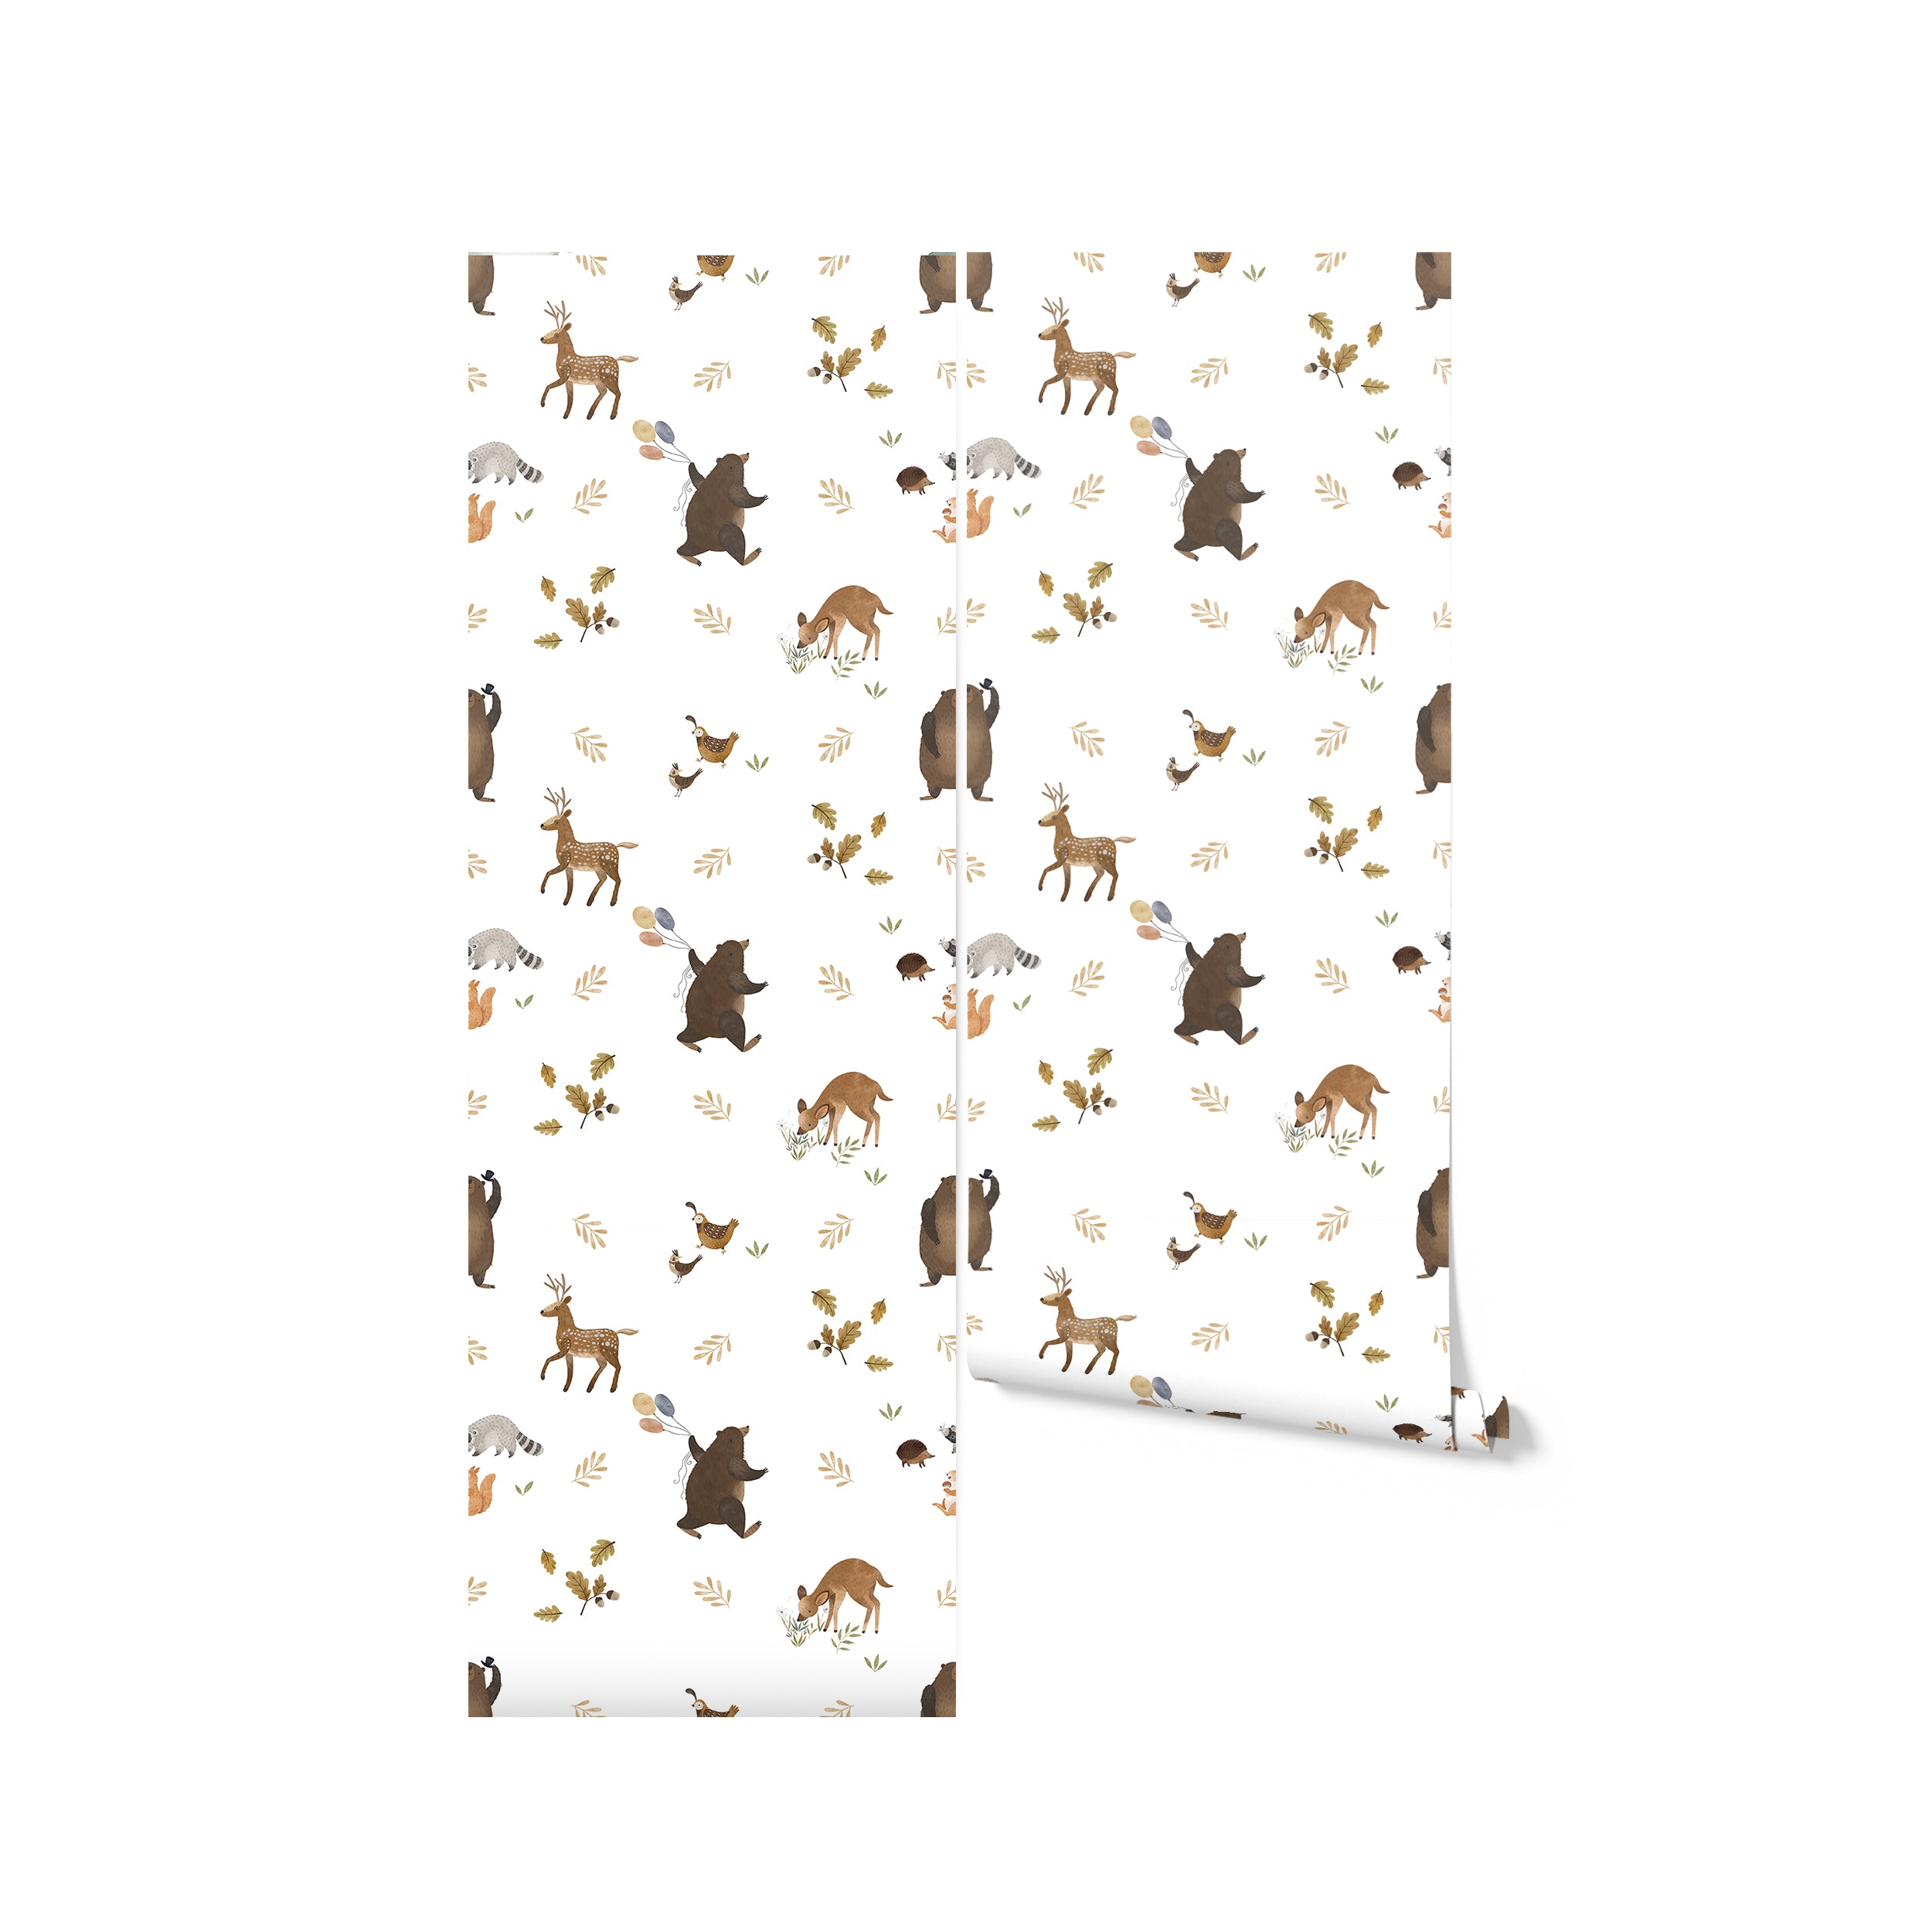 Rolled view of Forest Bear Wallpaper depicting a cheerful pattern of forest animals and nature elements on a white background. This design is ideal for adding a whimsical and lively touch to nursery or playroom interiors